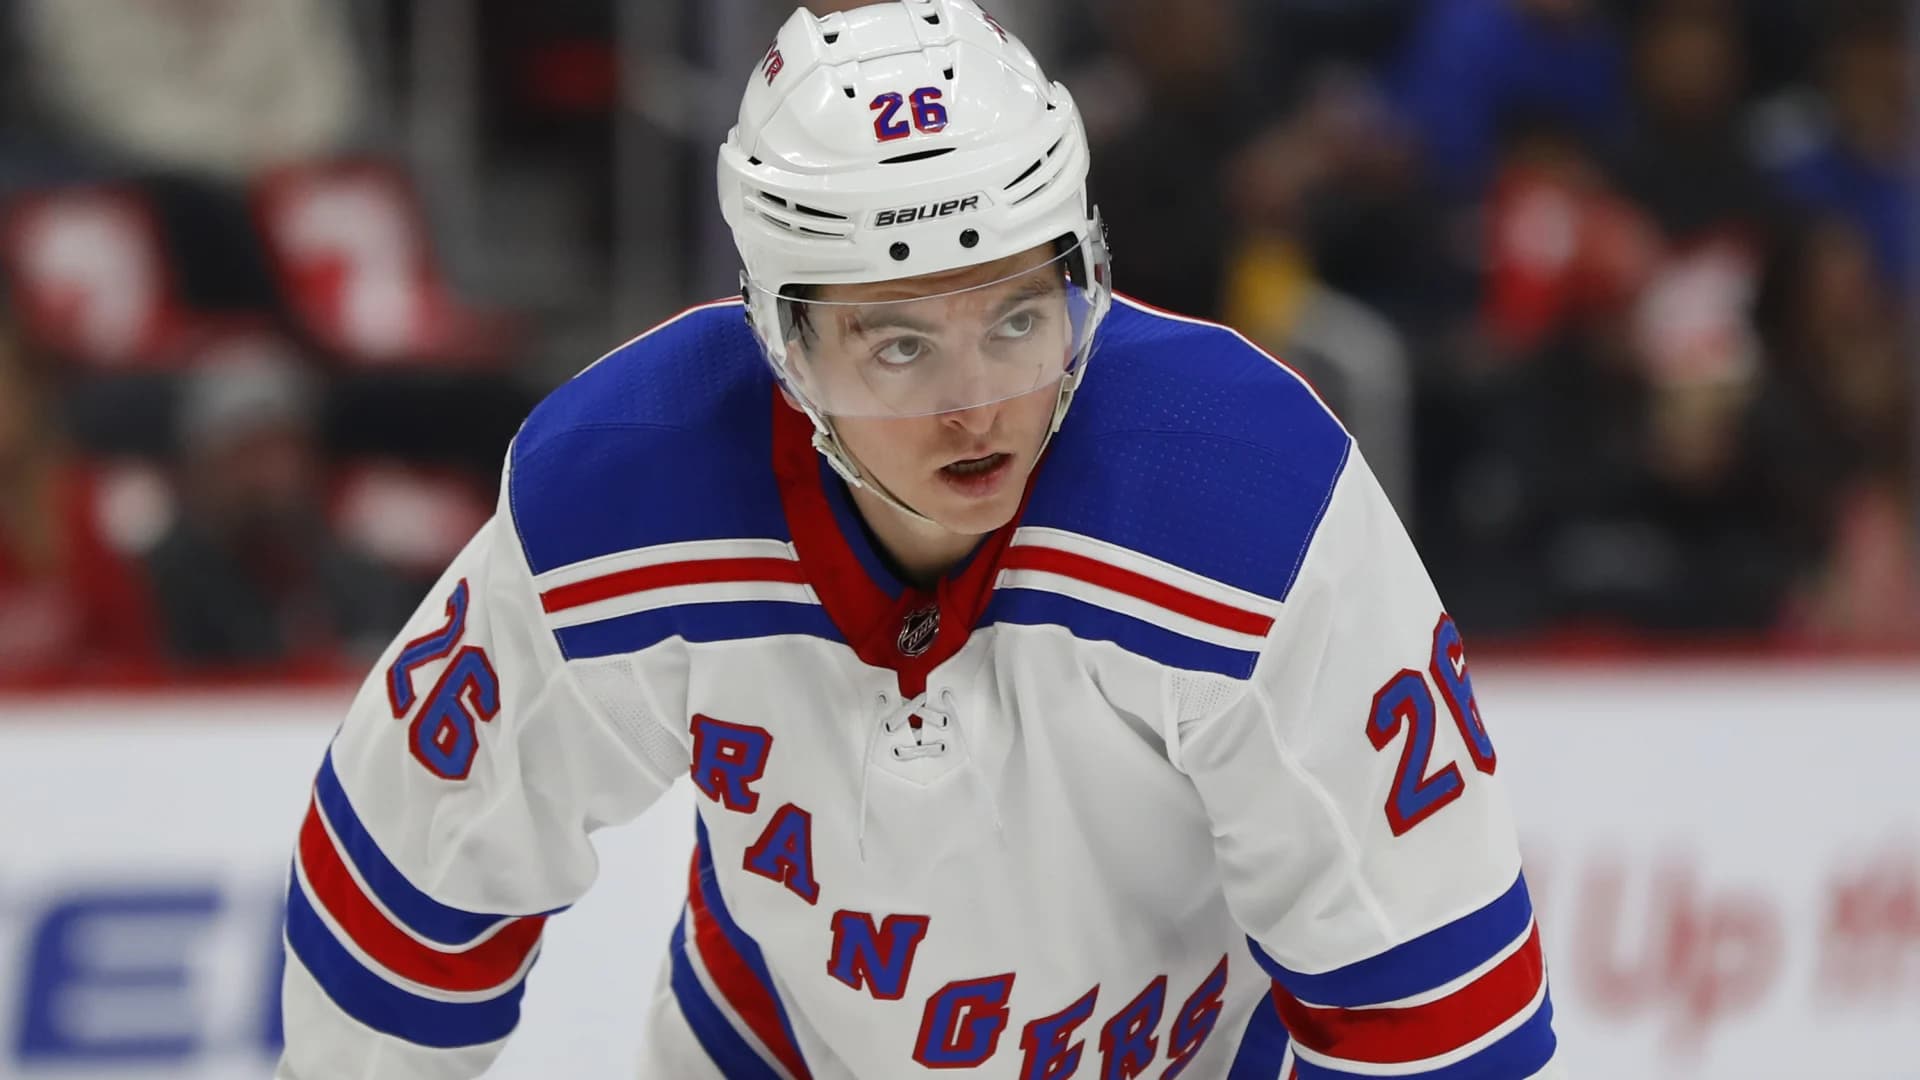 Jimmy Vesey among 3 vets signed by Devils to tryout deals